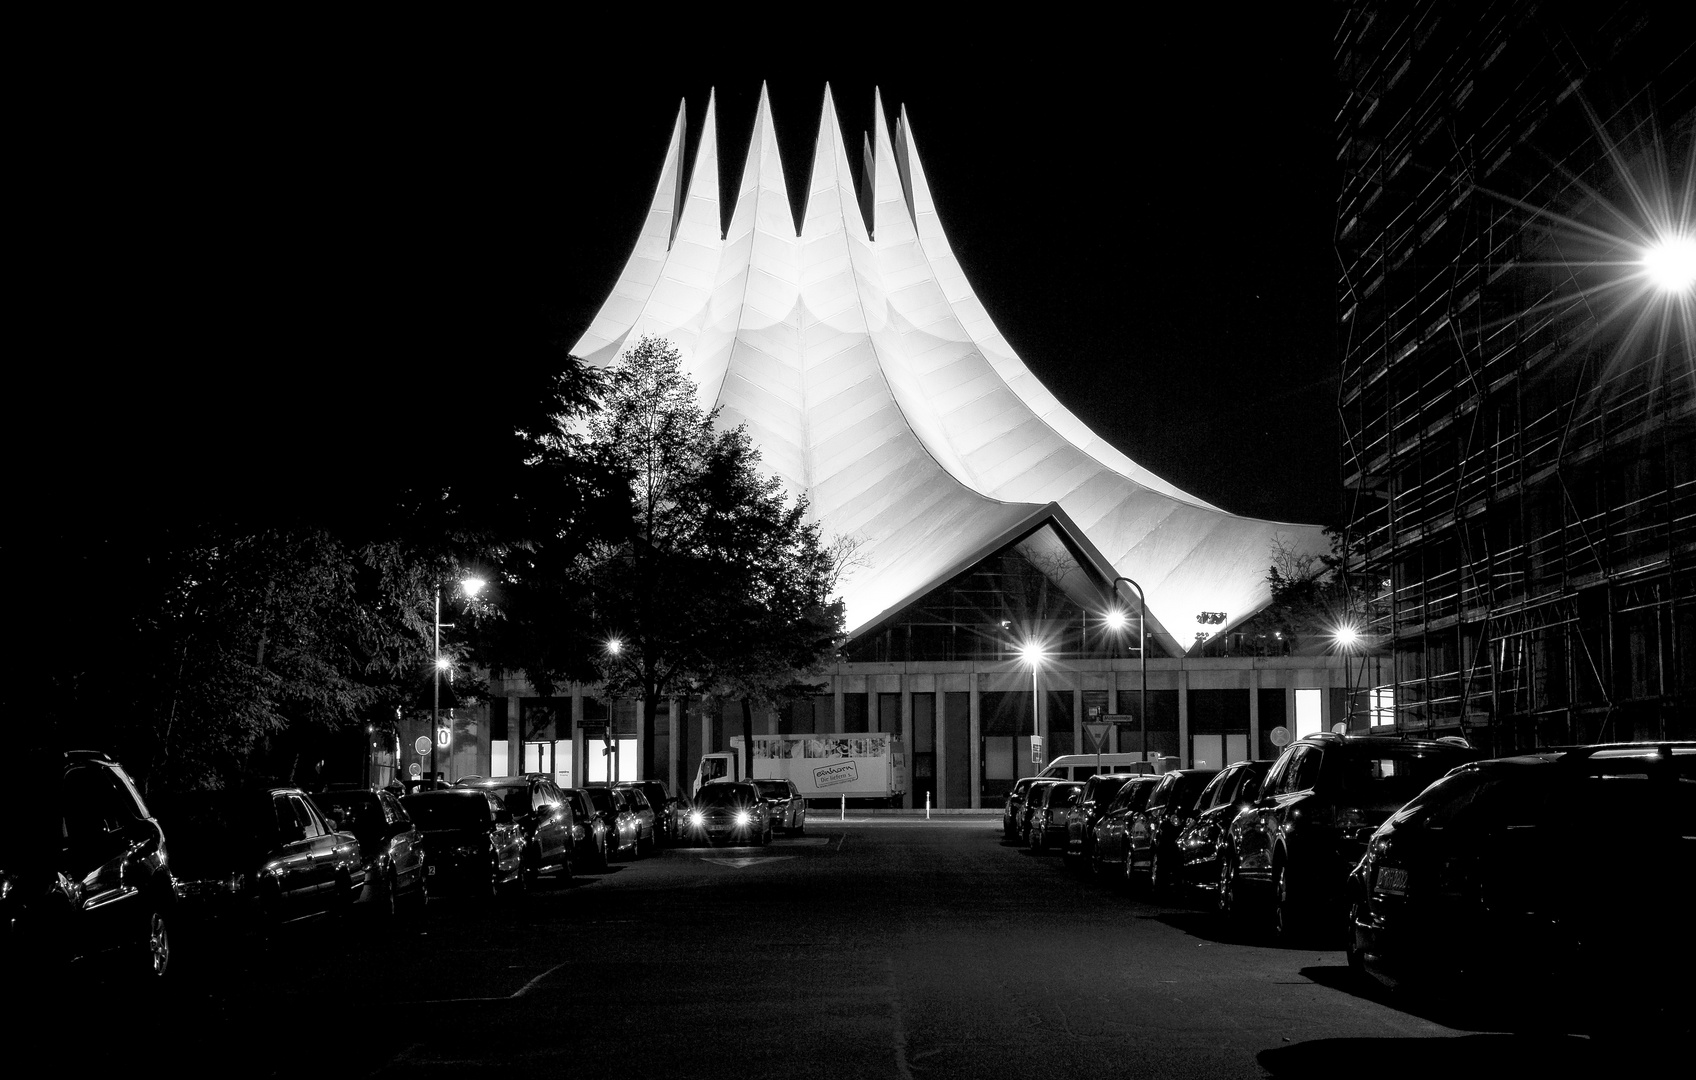 Another street view of Tempodrom - Berlin festival of lights 2011